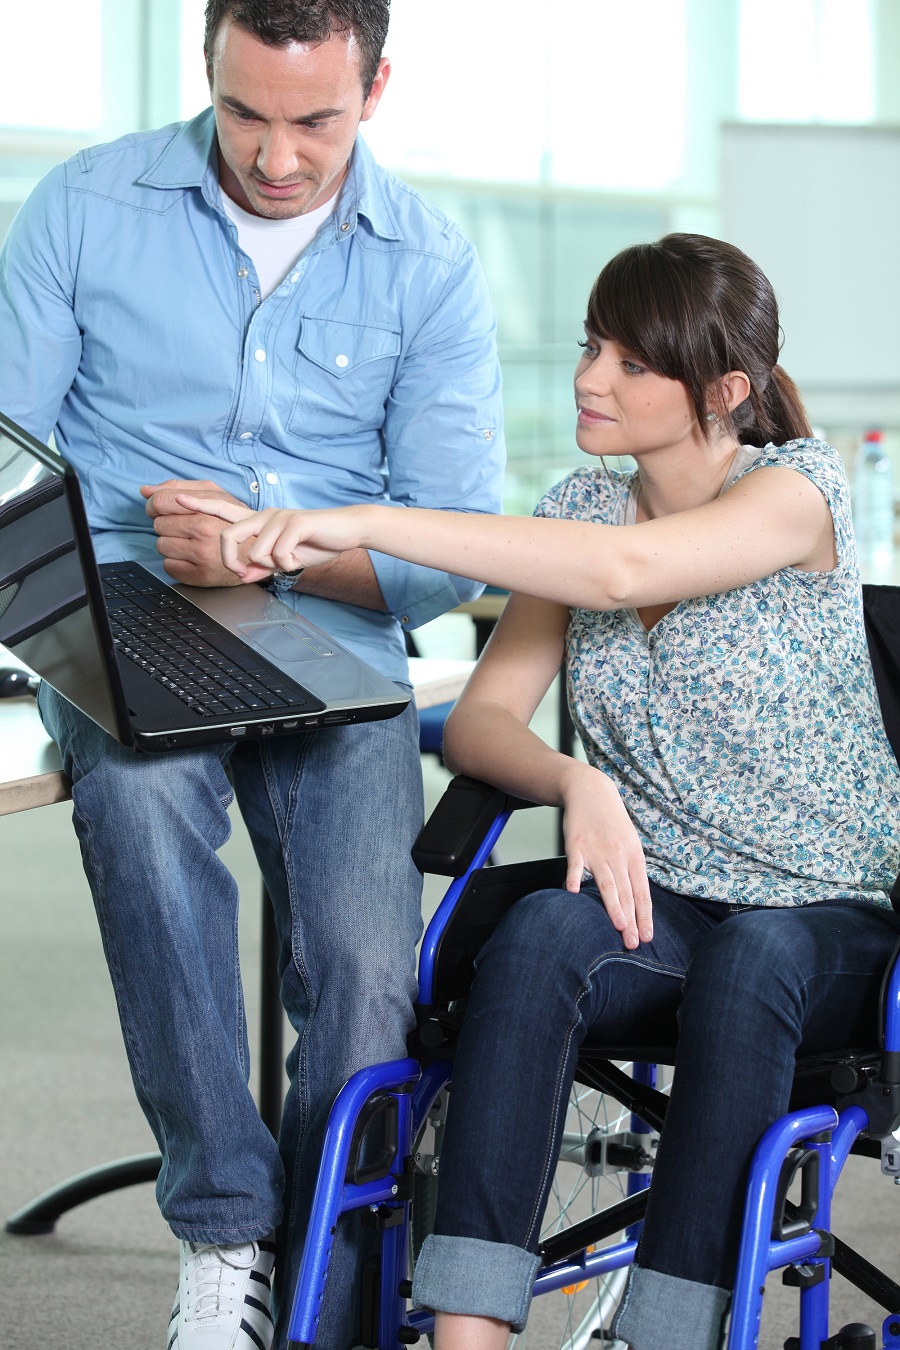 woman in wheelchair being shown something on a laptop